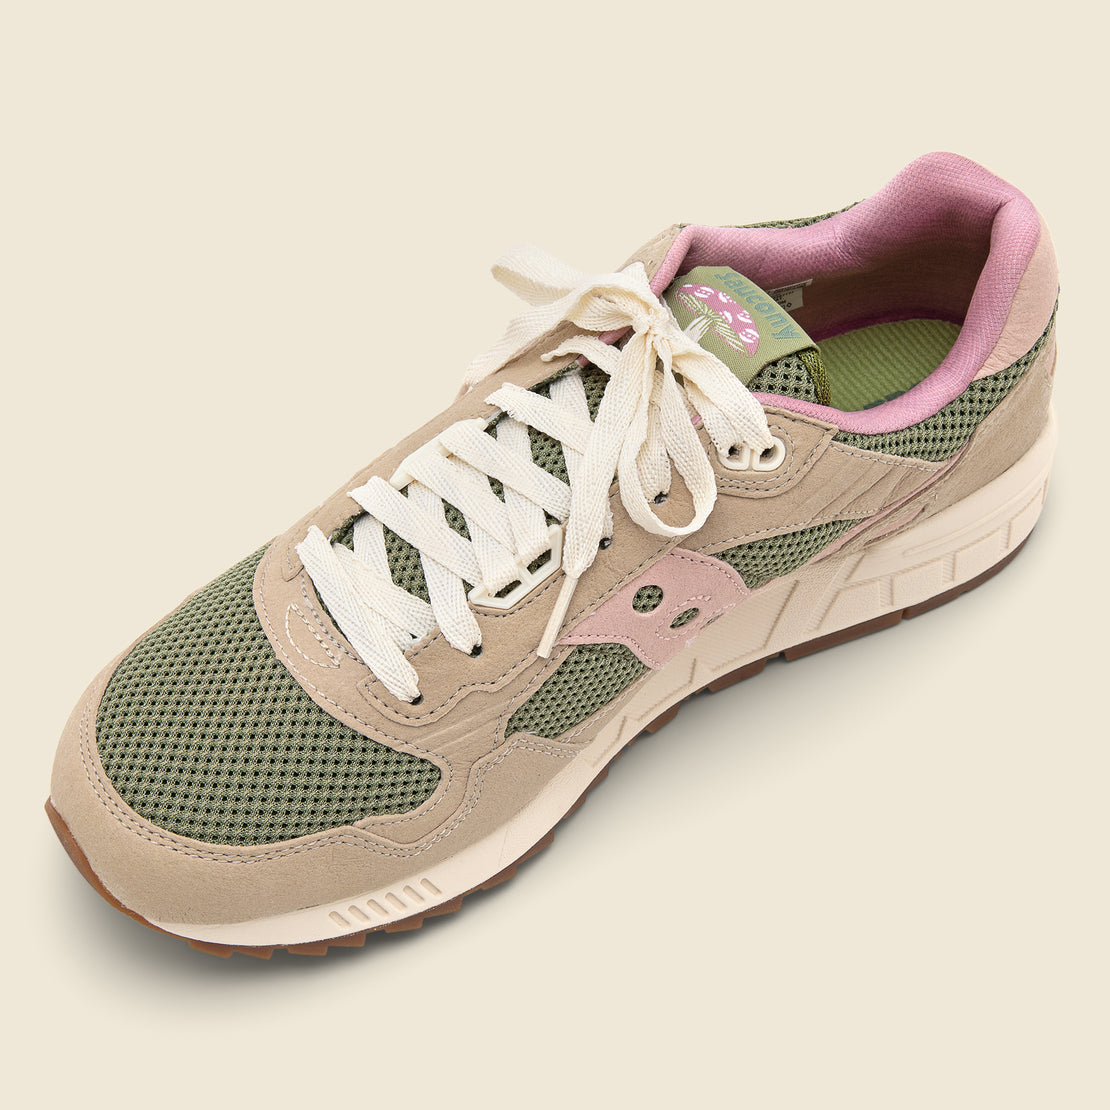 Shadow 5000 Mushroom Sneaker - Tan/Green/Pink - Saucony - STAG Provisions - Shoes - Athletic